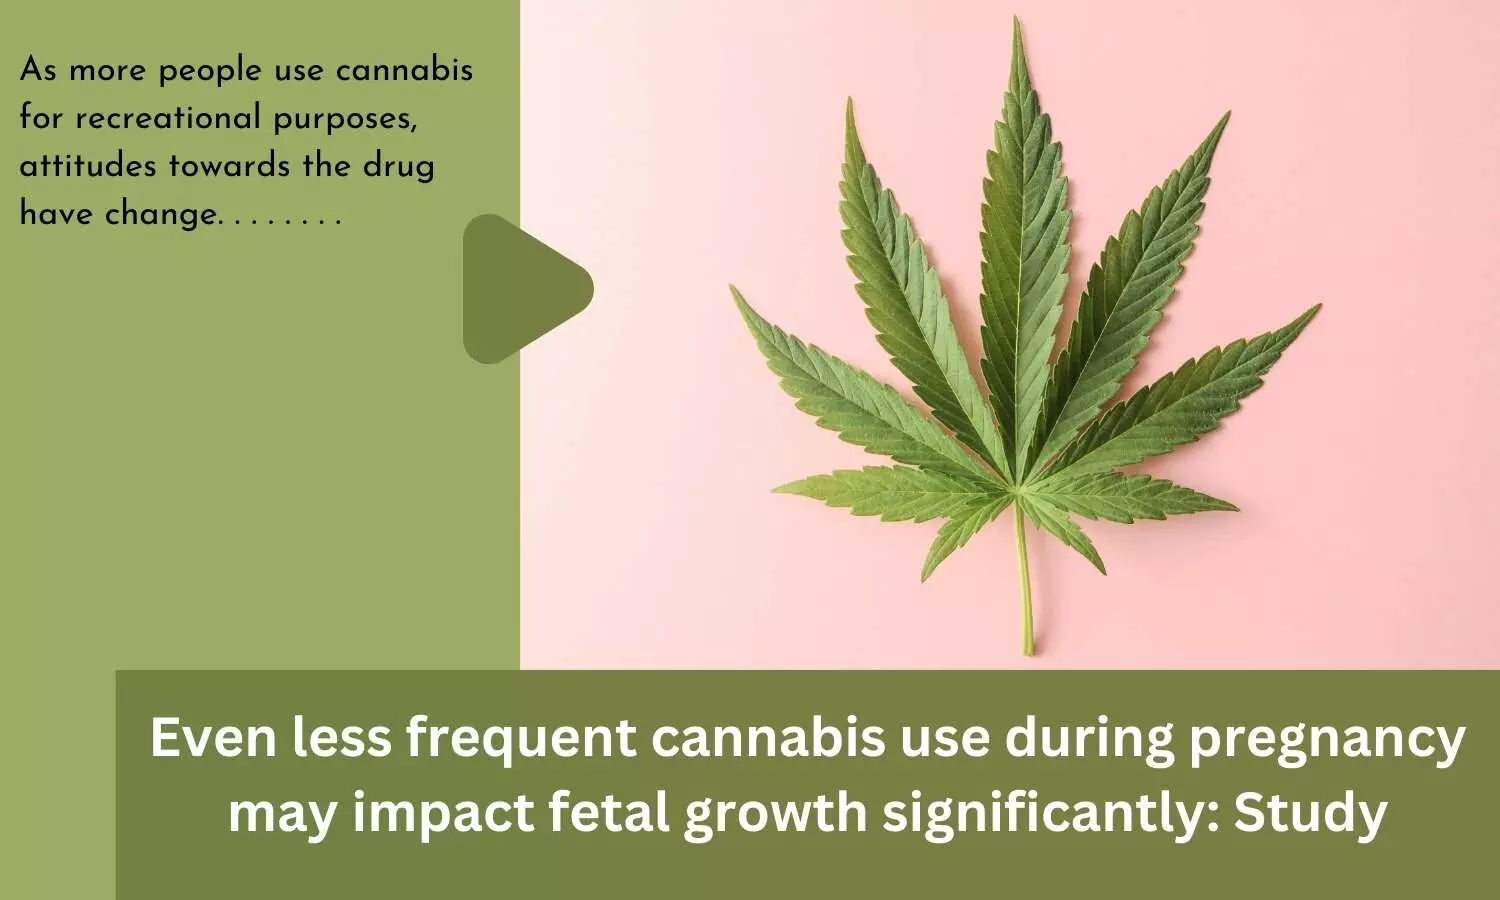 Even less frequent cannabis use during pregnancy may impact fetal growth significantly: Study